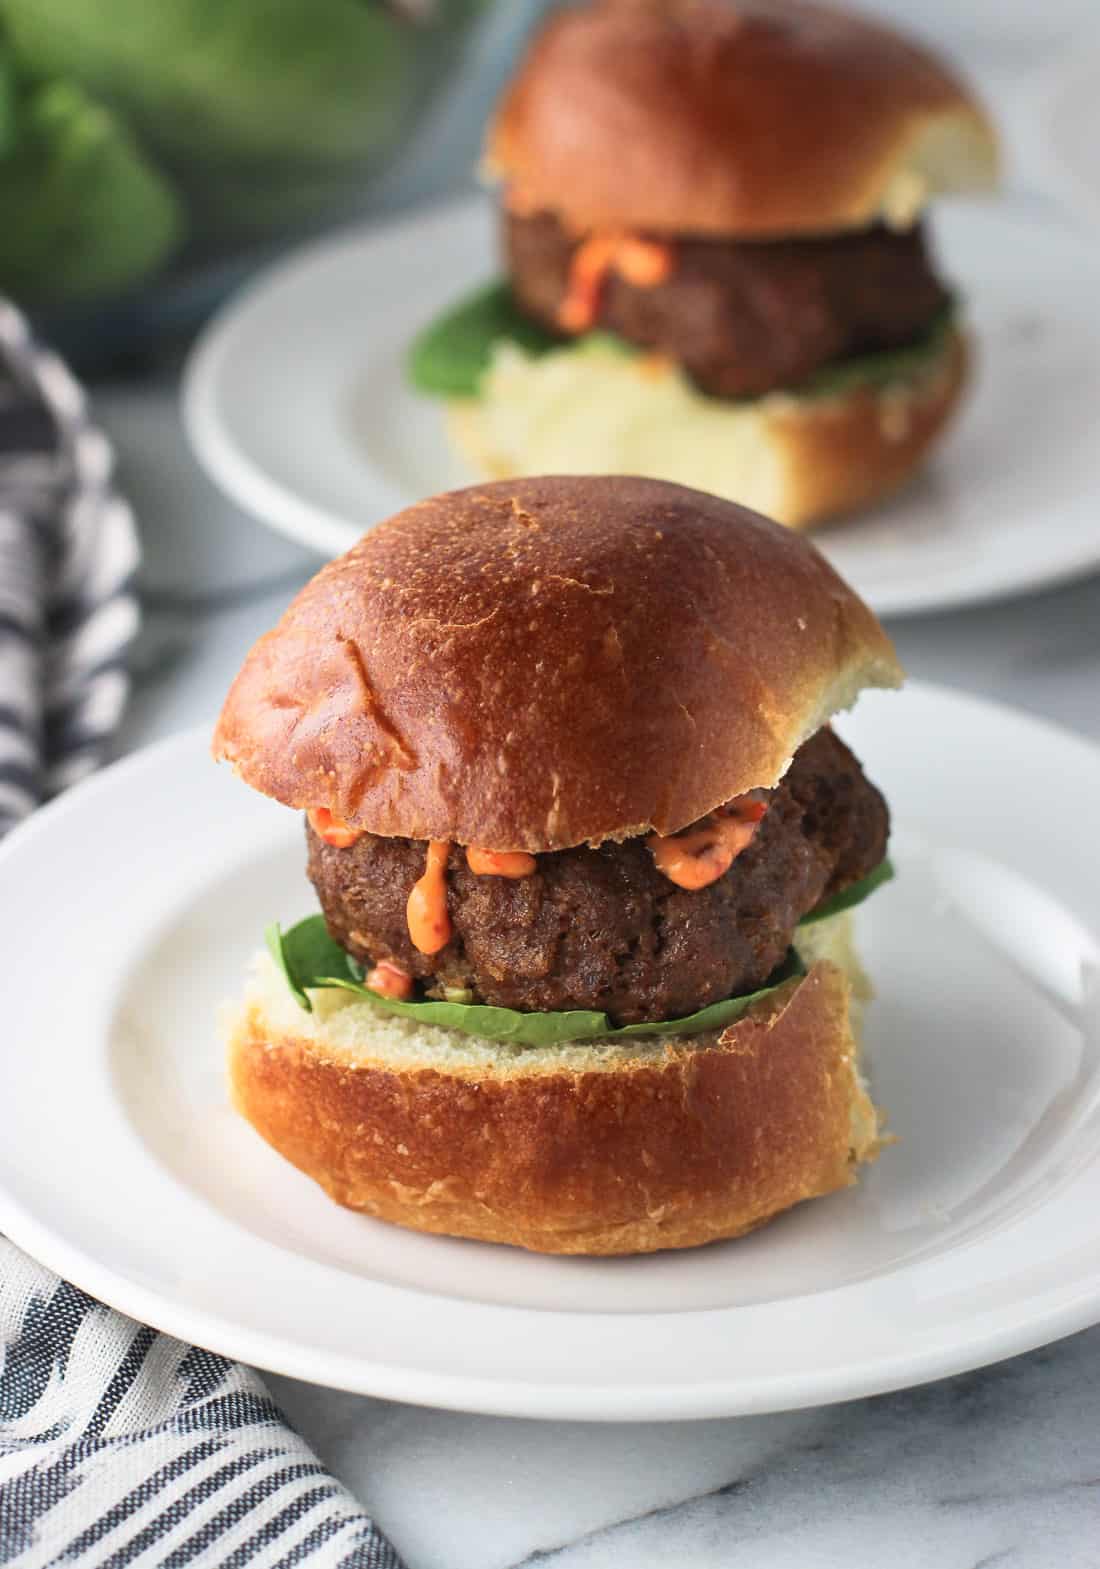 A turkey burger slider, with lettuce and chili garlic sauce, on a small slider bun on a plate with another in the background